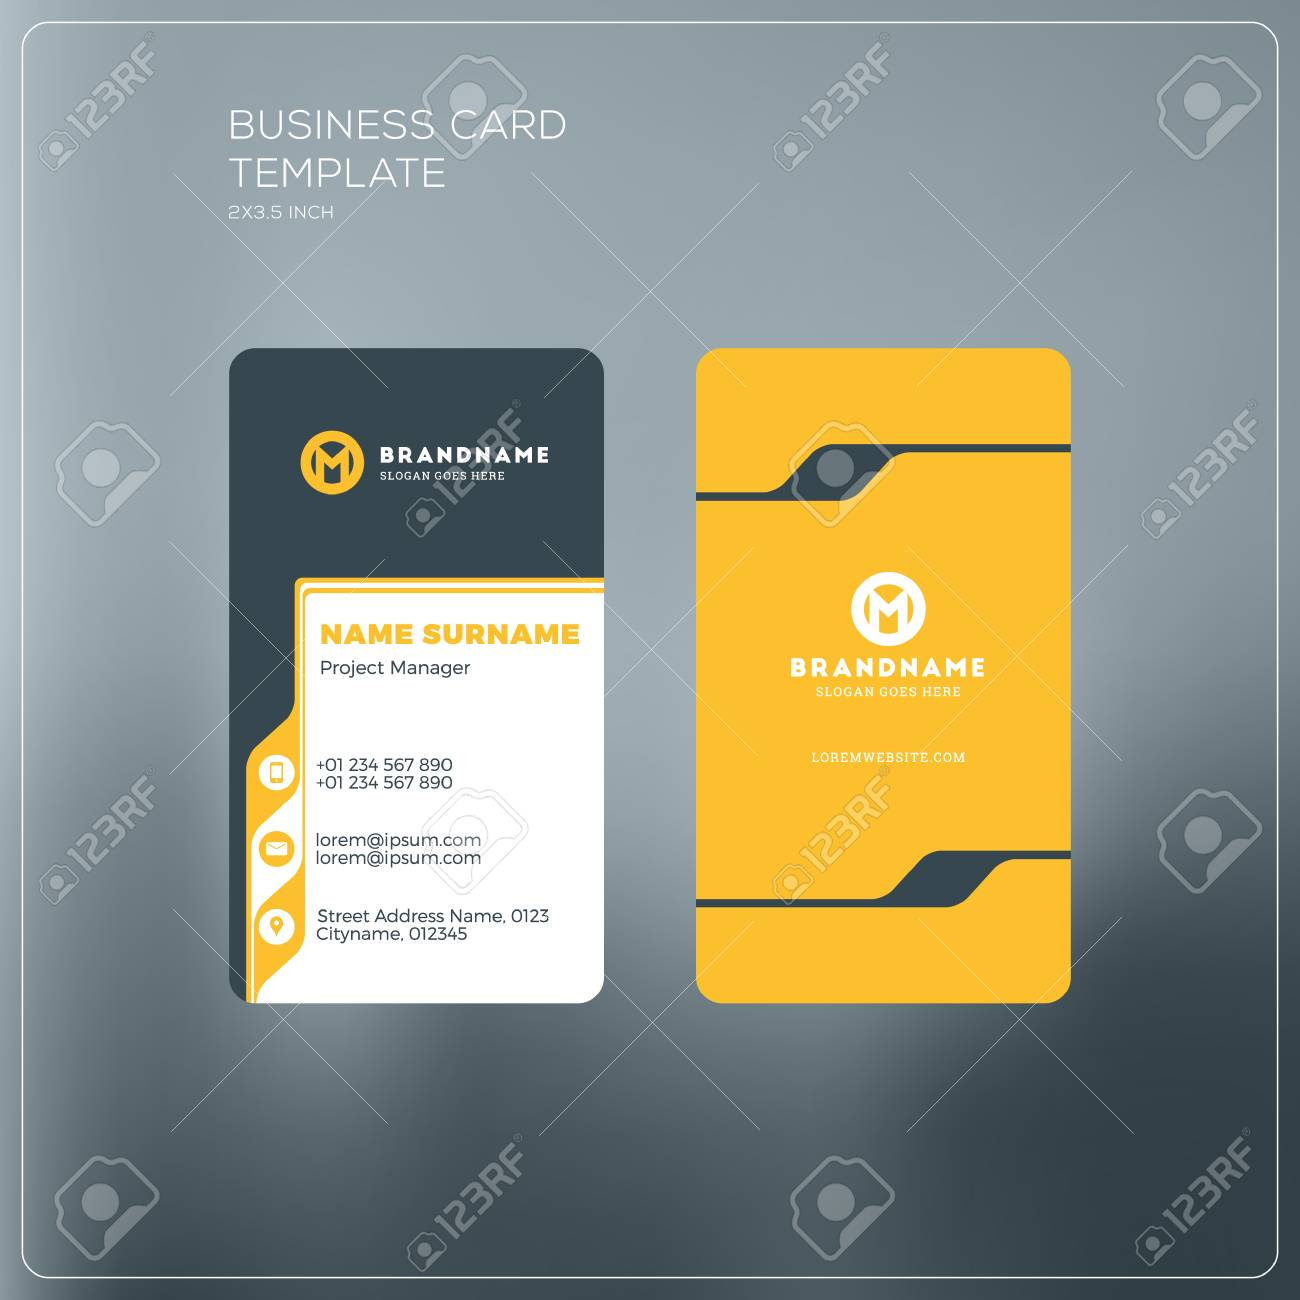 Personal Business Cards Template Regarding Google Search Business Card Template